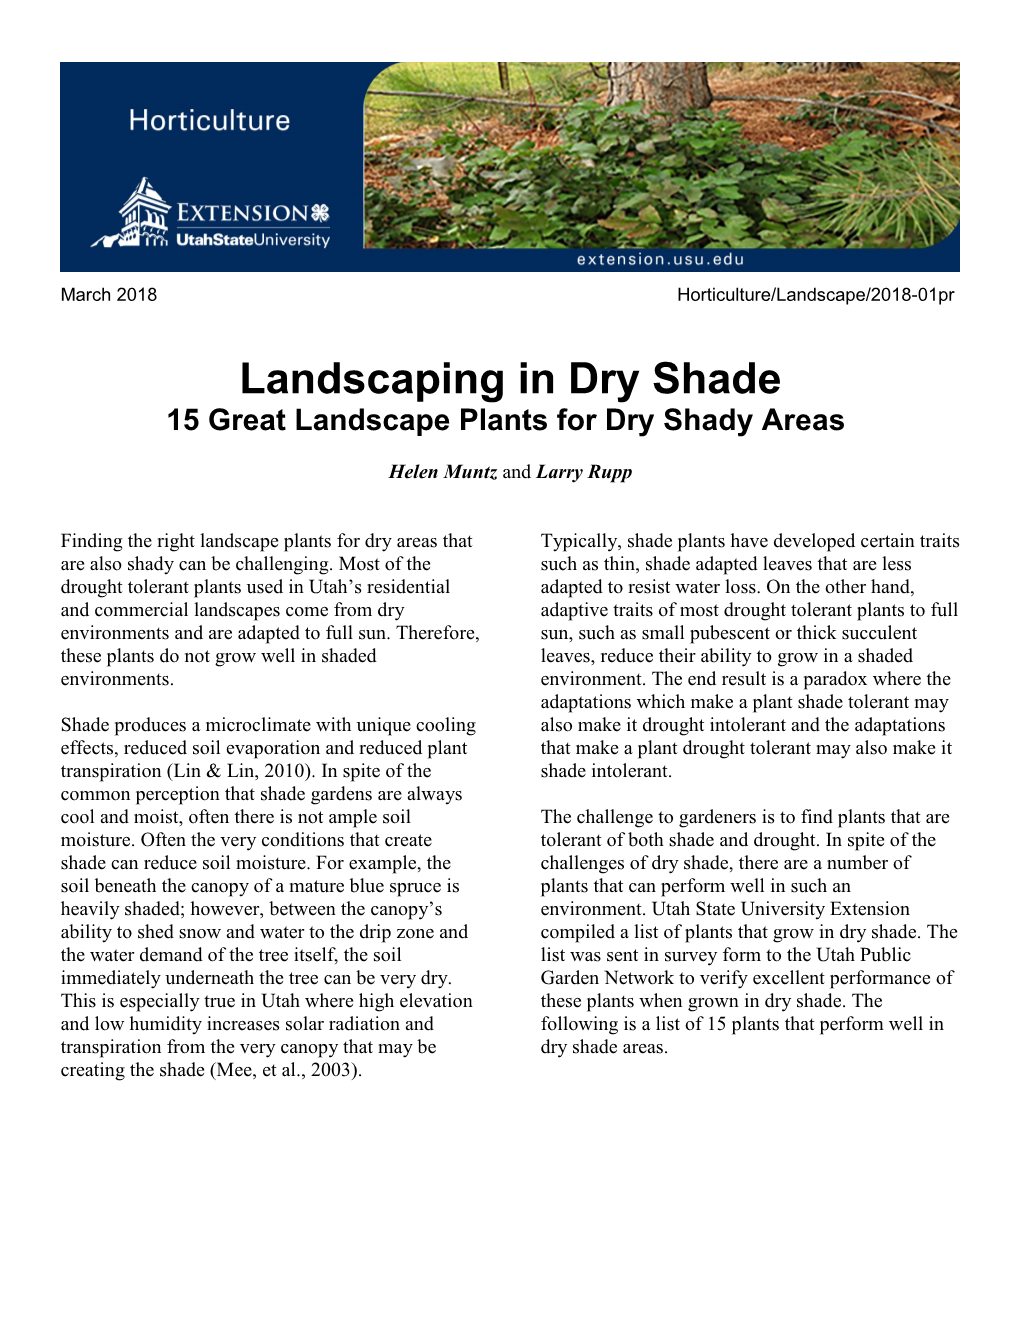 Landscaping in Dry Shade 15 Great Landscape Plants for Dry Shady Areas